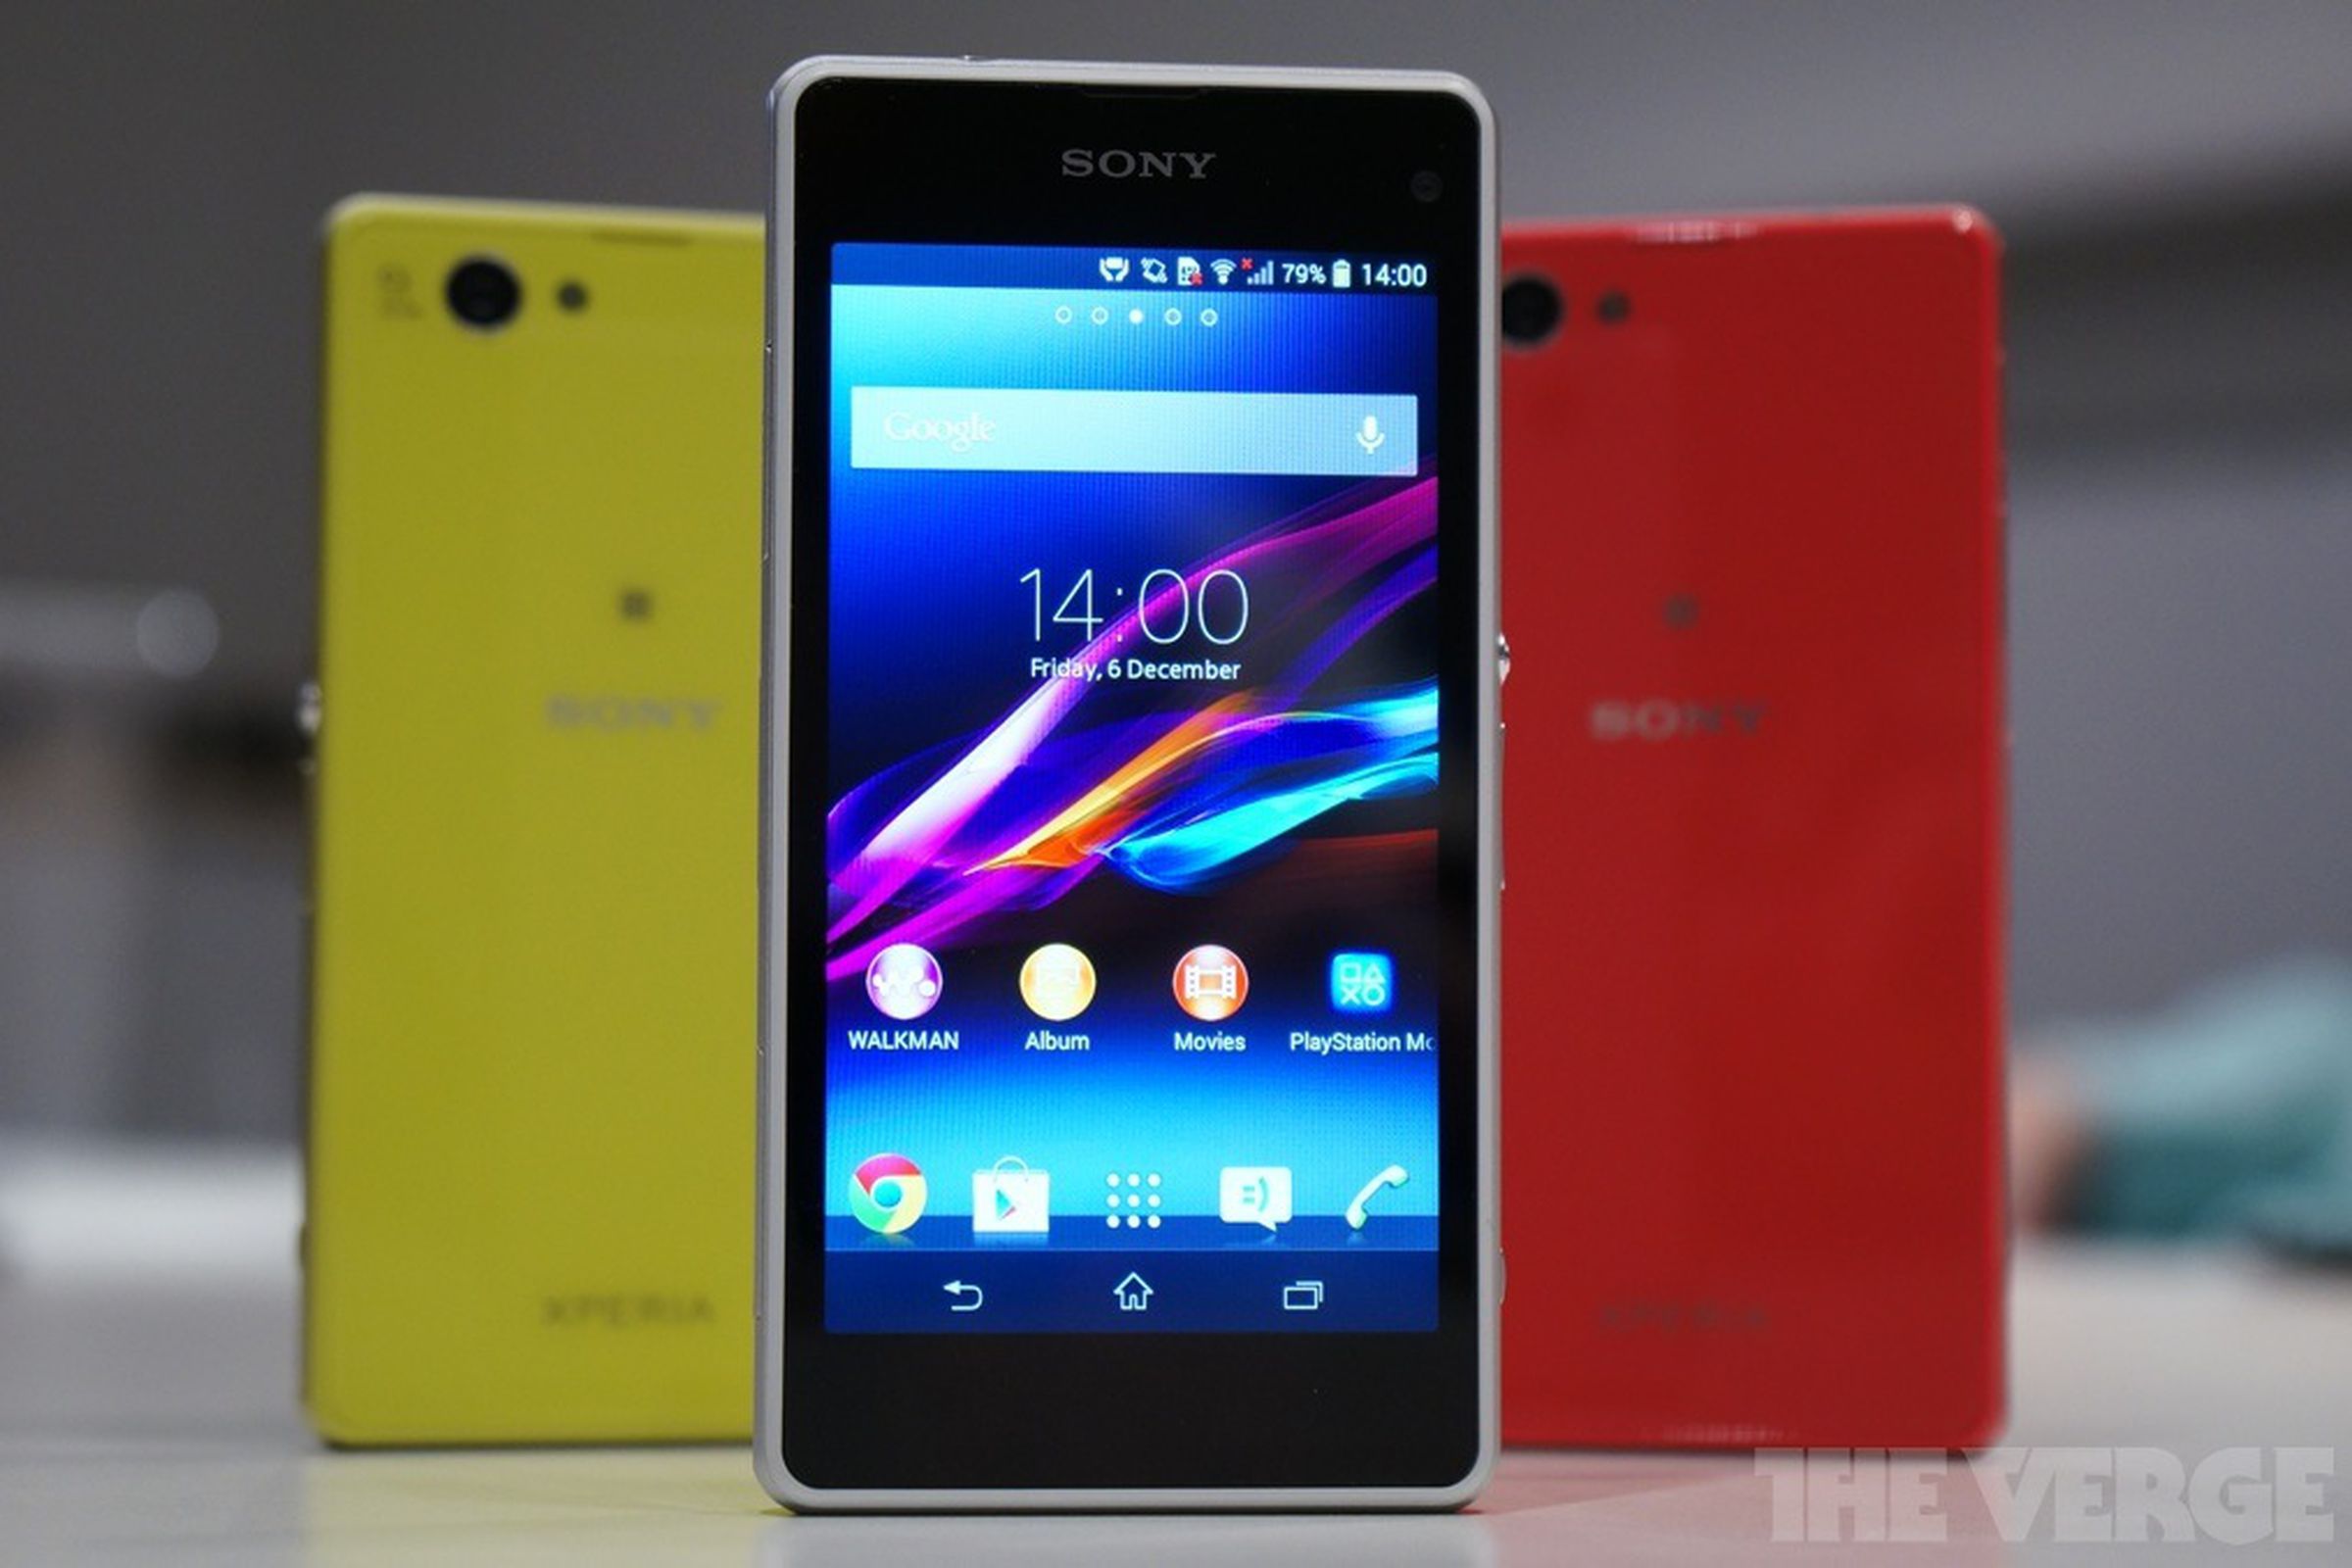 Gallery Photo: Sony Xperia Z1 Compact hands-on photos